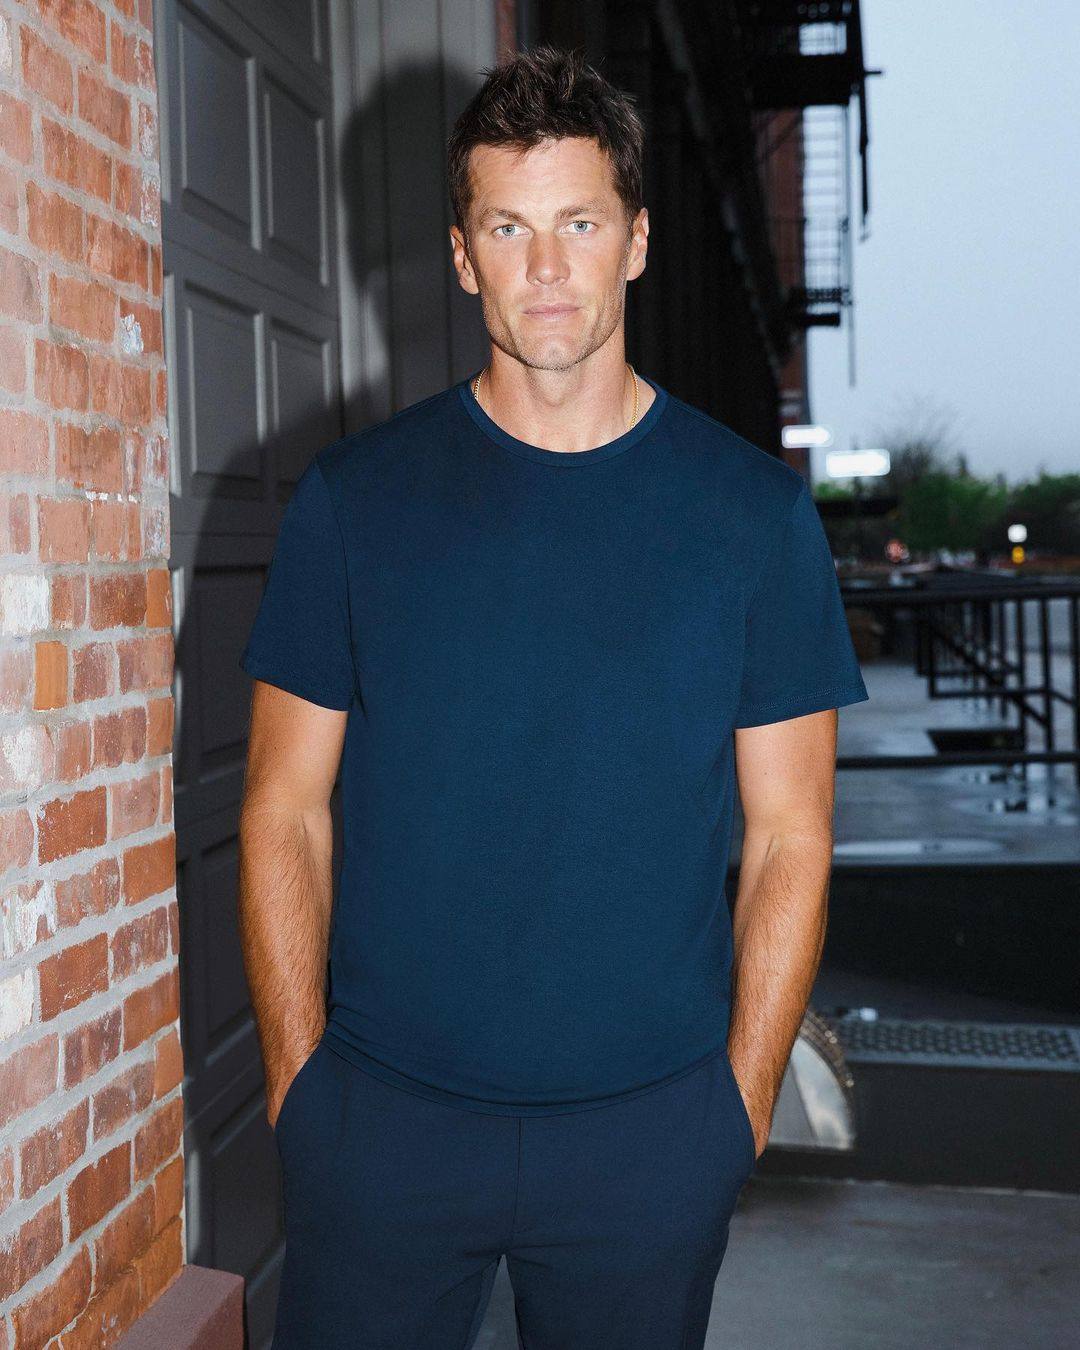 What has former star quarterback Tom Brady been up to following his retirement? Photo: @tombrady/Instagram